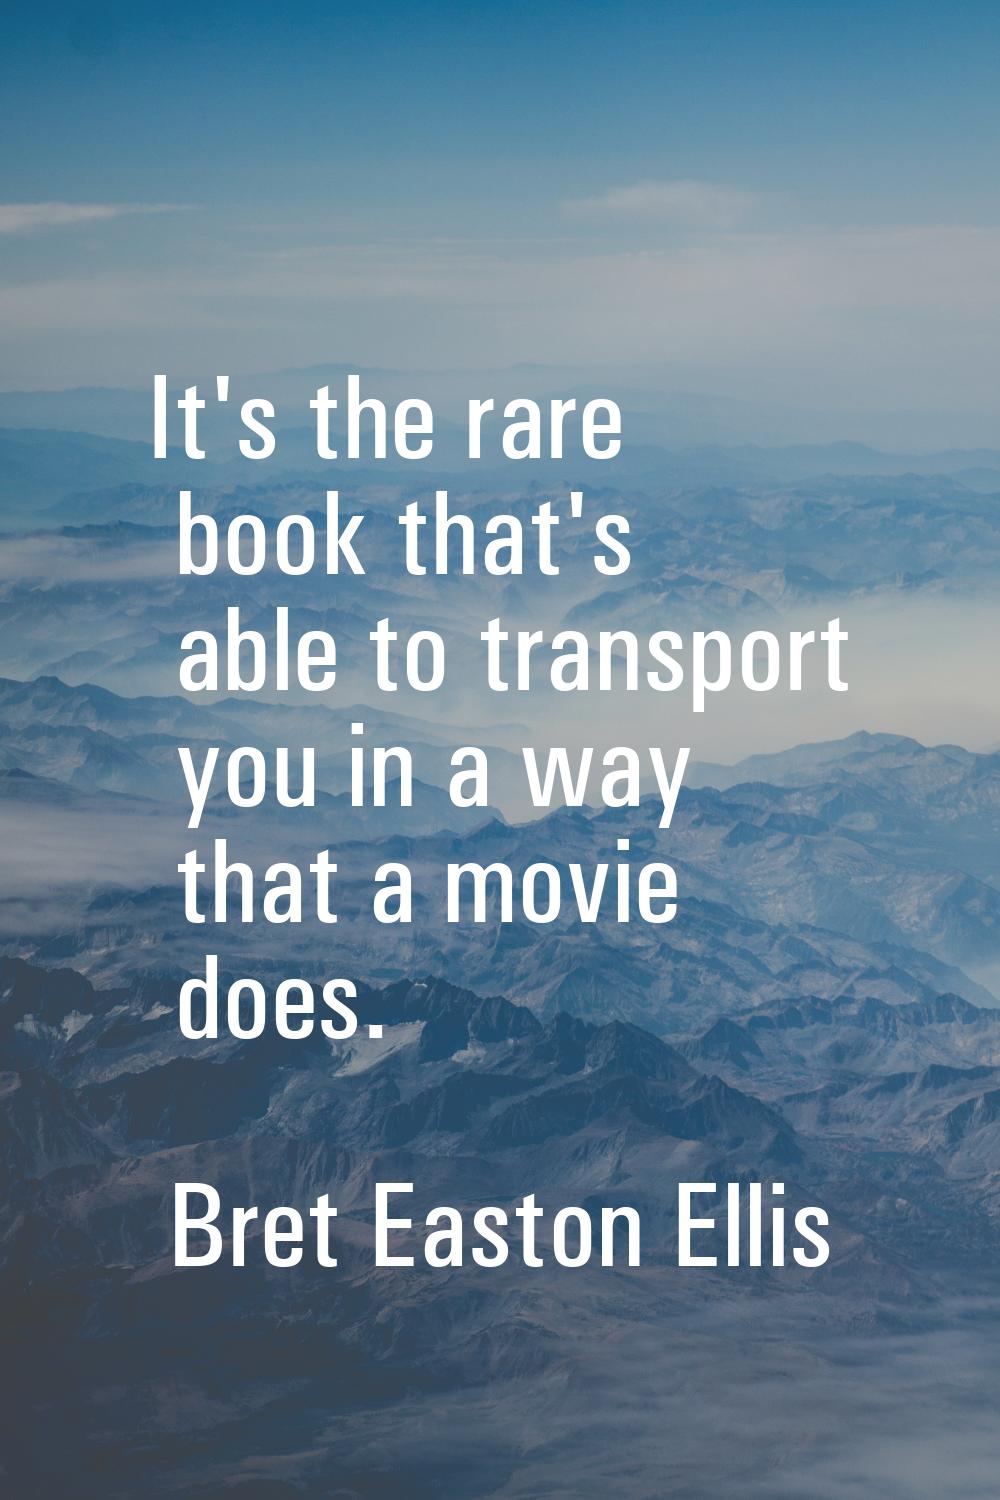 It's the rare book that's able to transport you in a way that a movie does.